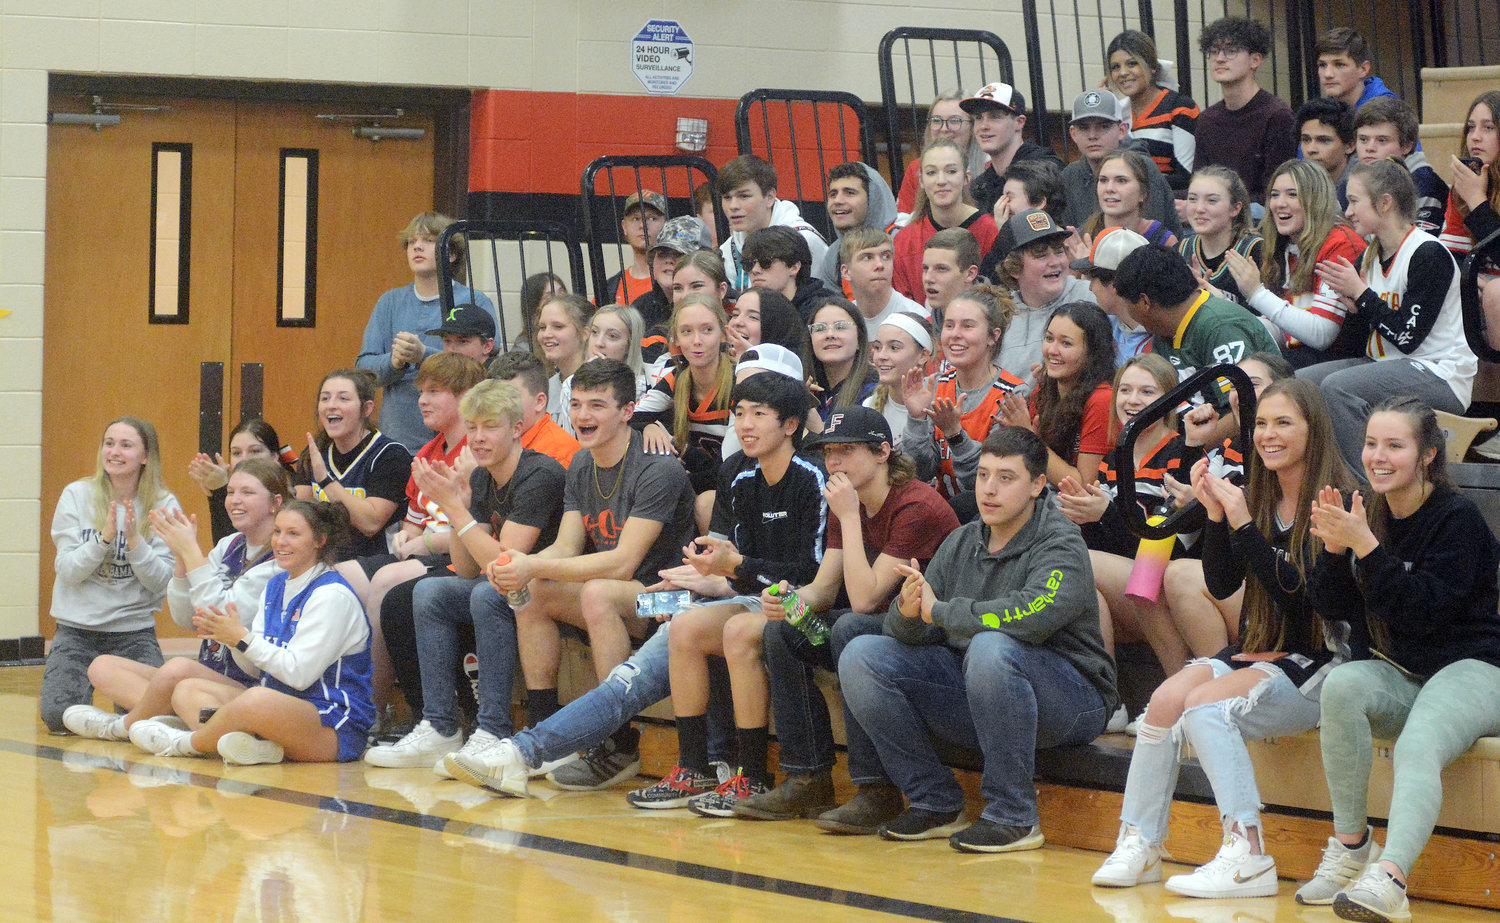 OHS students applaud as finalists were announced at halftime of the Hermann versus Owensville varsity boys basketball game played in Owensville. OHS